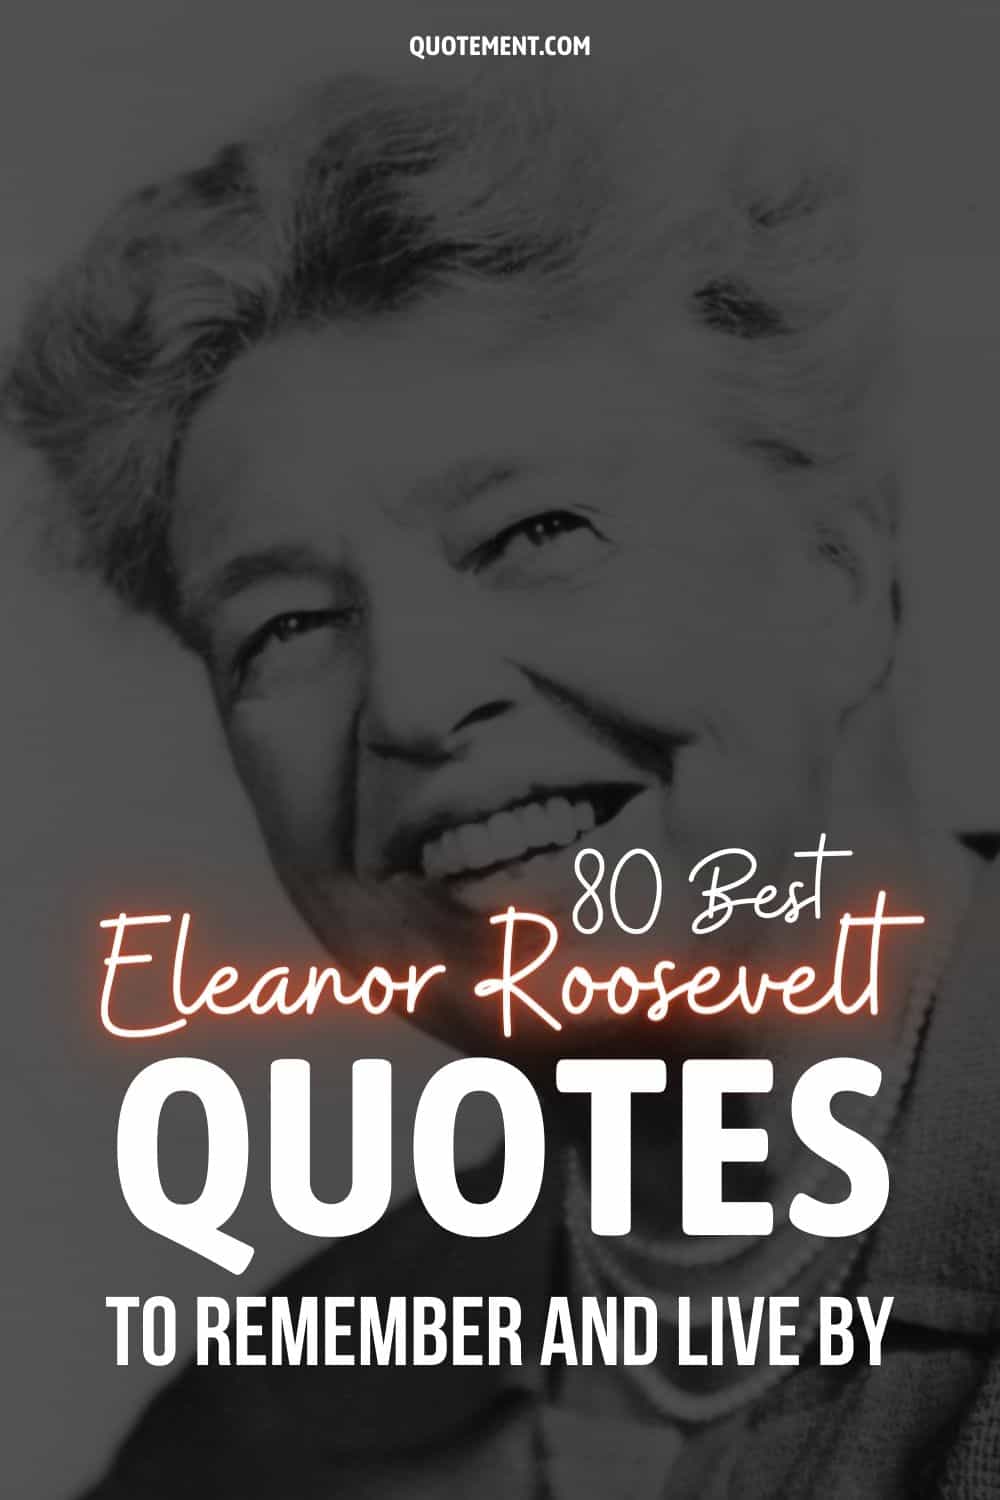 80 Best Eleanor Roosevelt Quotes To Remember And Live By
